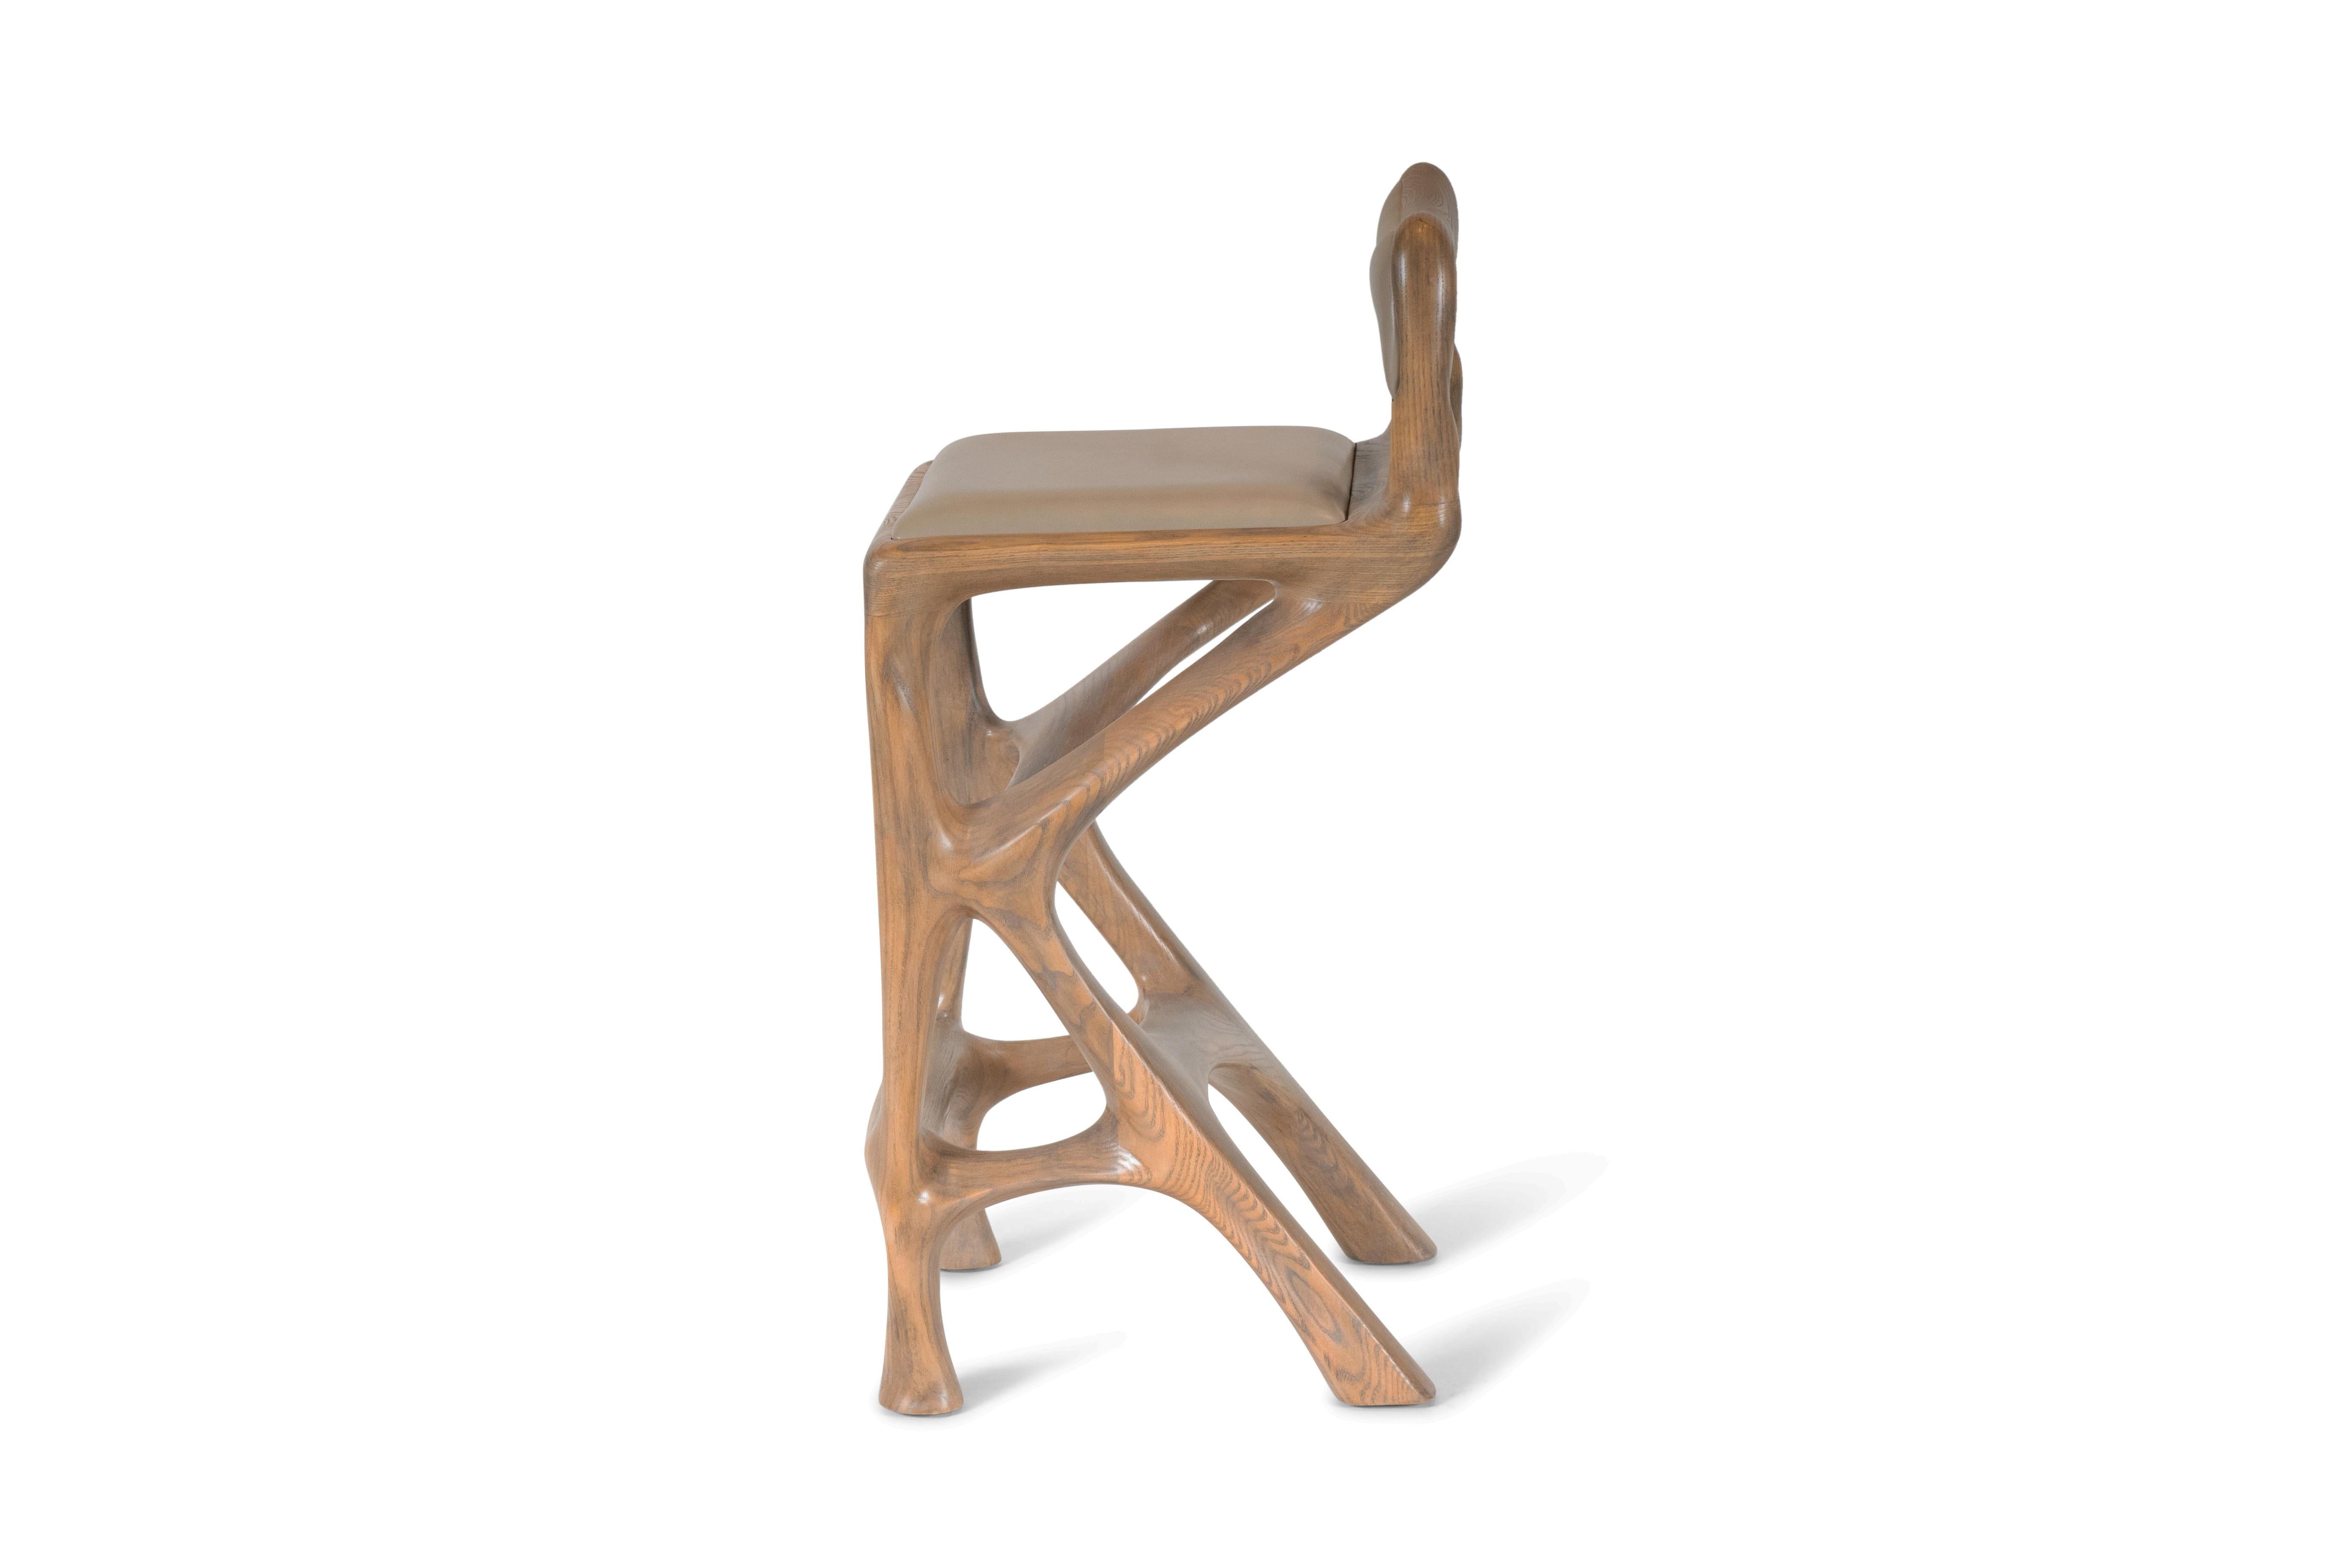 Barstool designed by Amorph made out of solid ashwood and leather. Stain color: Rusted walnut
Dimension: 34